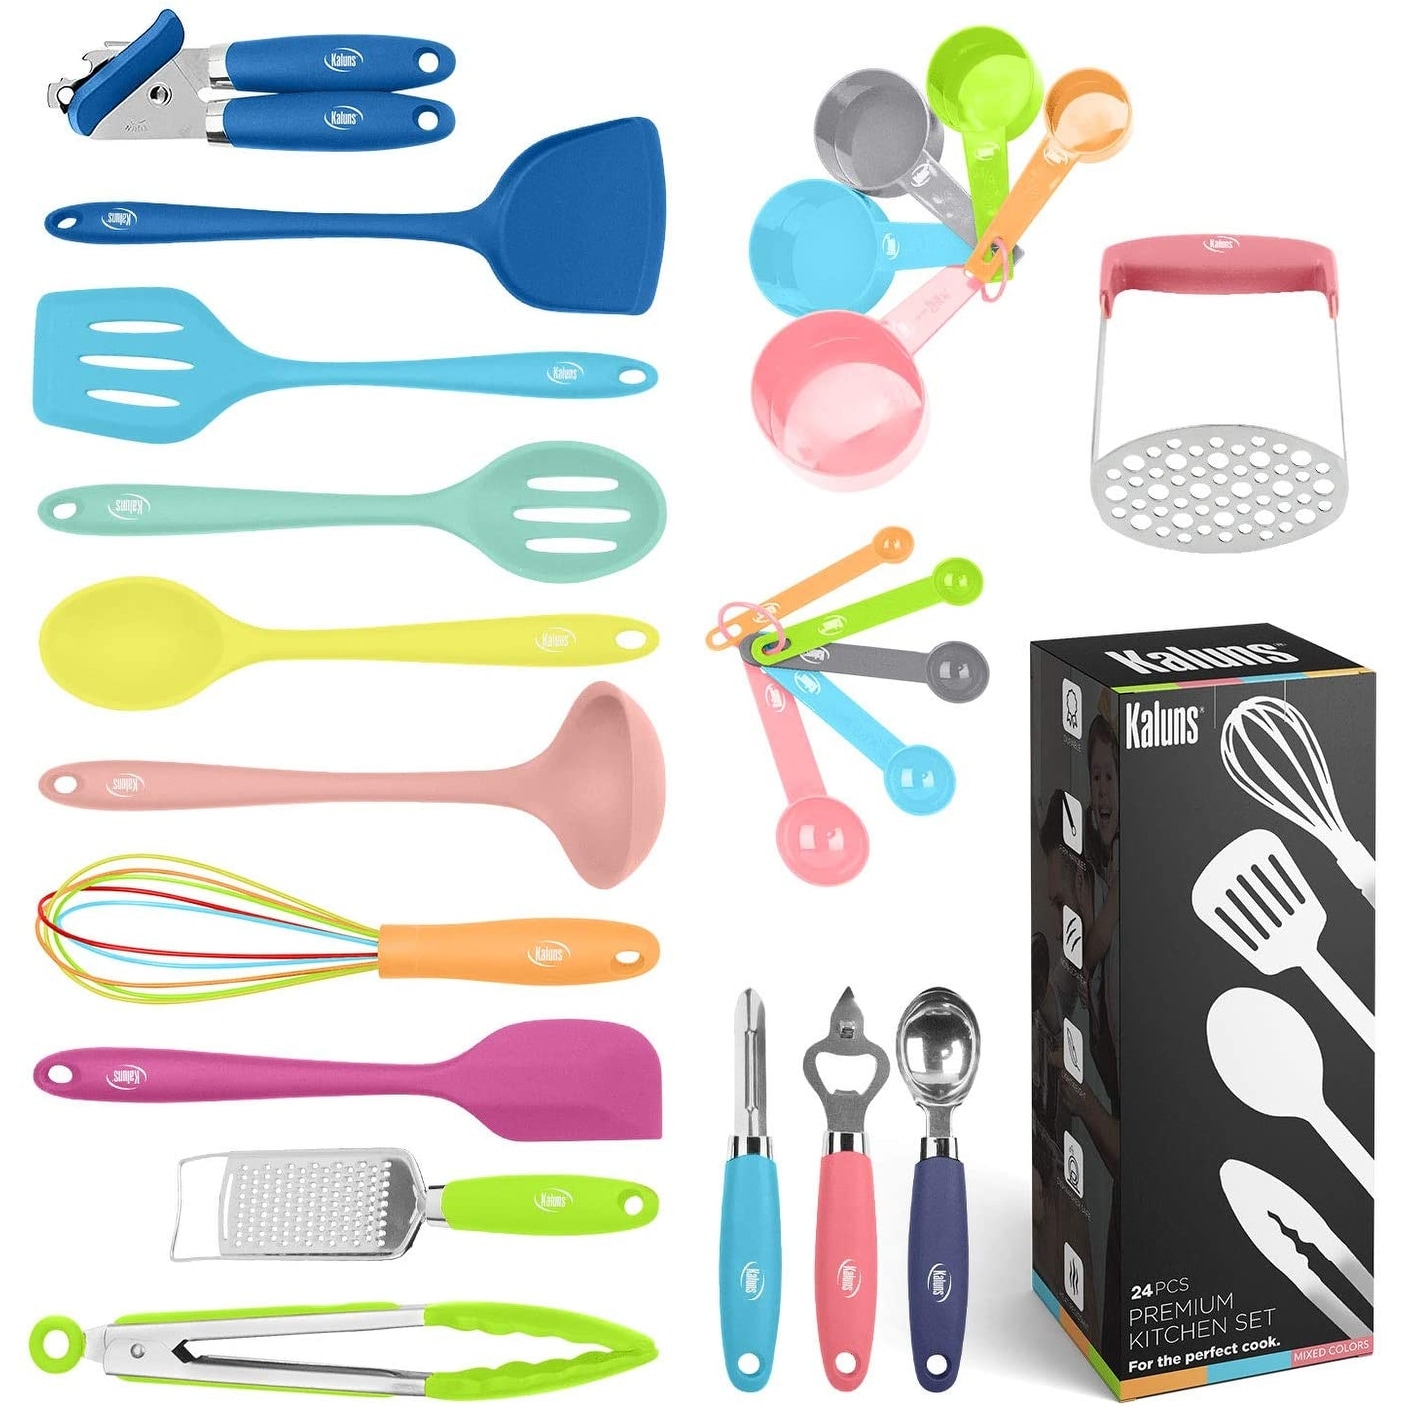 https://ak1.ostkcdn.com/images/products/is/images/direct/9247bea807de486d6f61fbe2f3d470016eccc583/Cooking-Utensils-Set%2C-24-Silicone-Kitchen-Utensils%2C-Non-Stick-and-Heat-Resistant-Kitchen-Tools%2C-Useful-Cooking-Gadgets.jpg